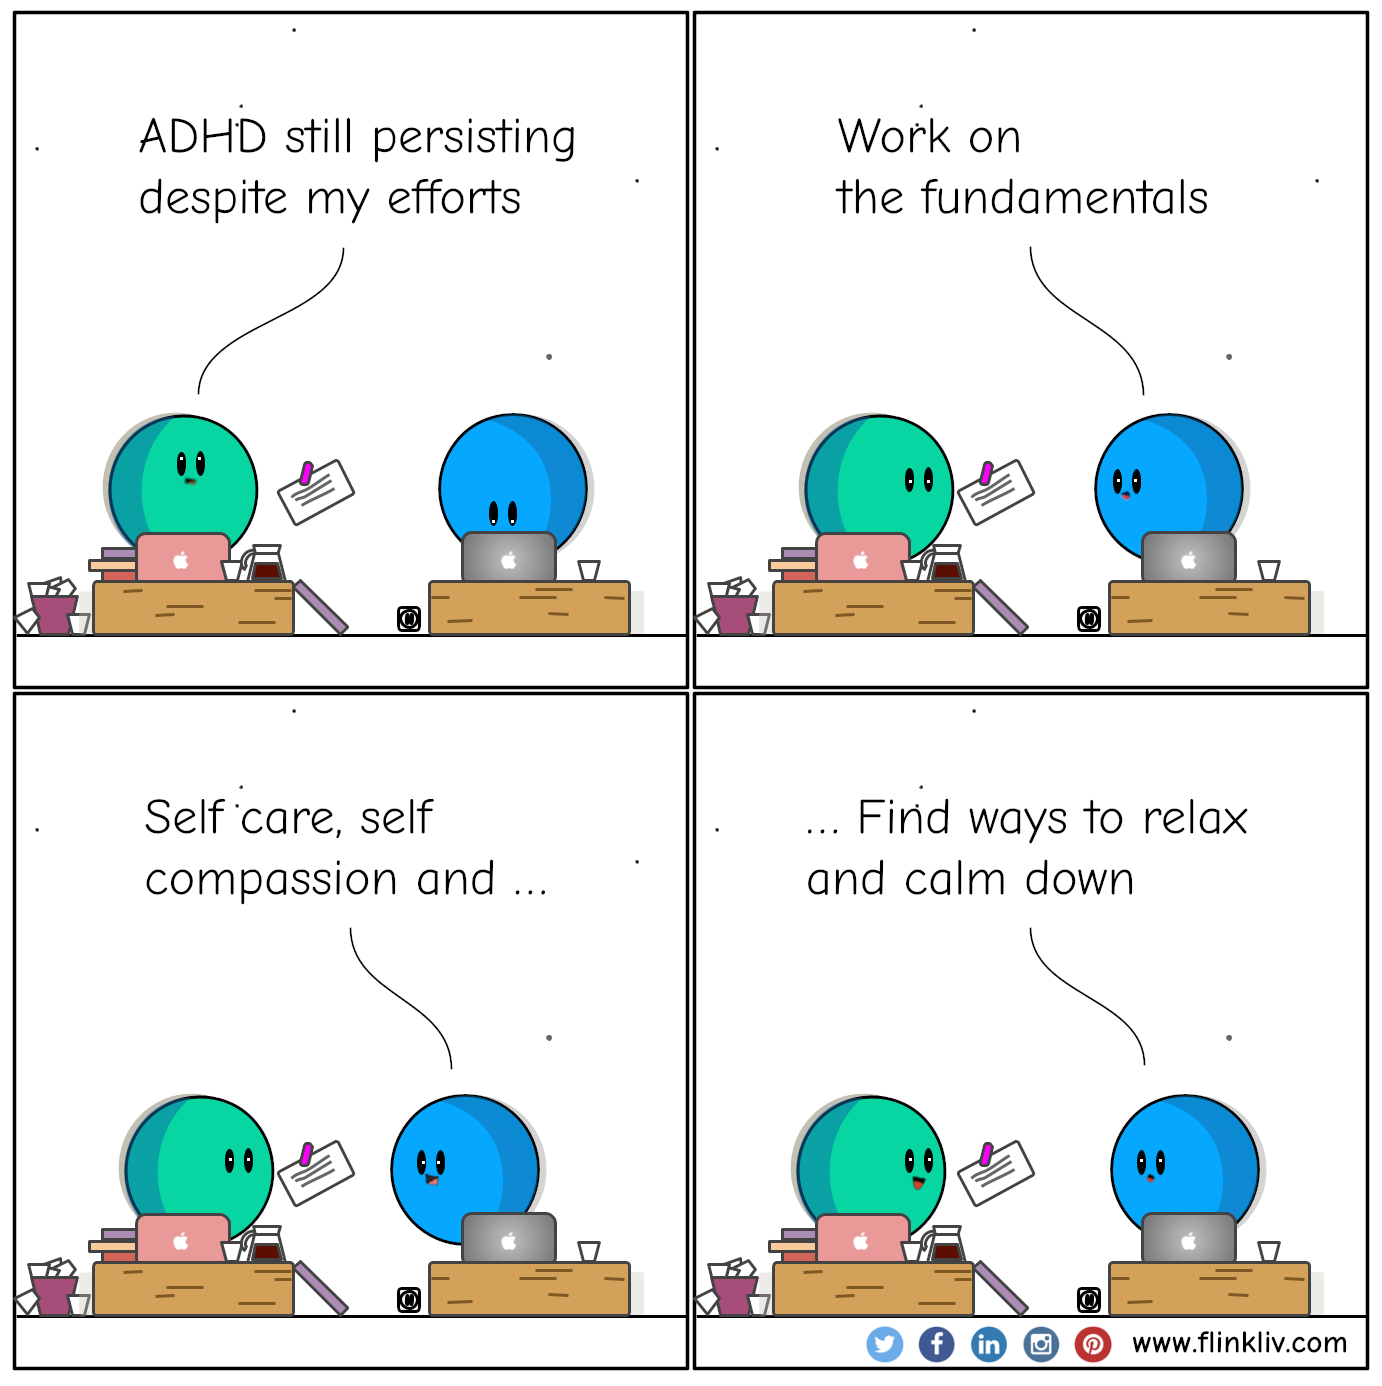 Conversation between A and B about ADHD and self-care and self-compassion.
					A: ADHD still persisting despite my efforts
					B: Work on the fundamentals
					B: Self care, self compassion and finding ways to relax and calm down
				By Flinkliv.com
			